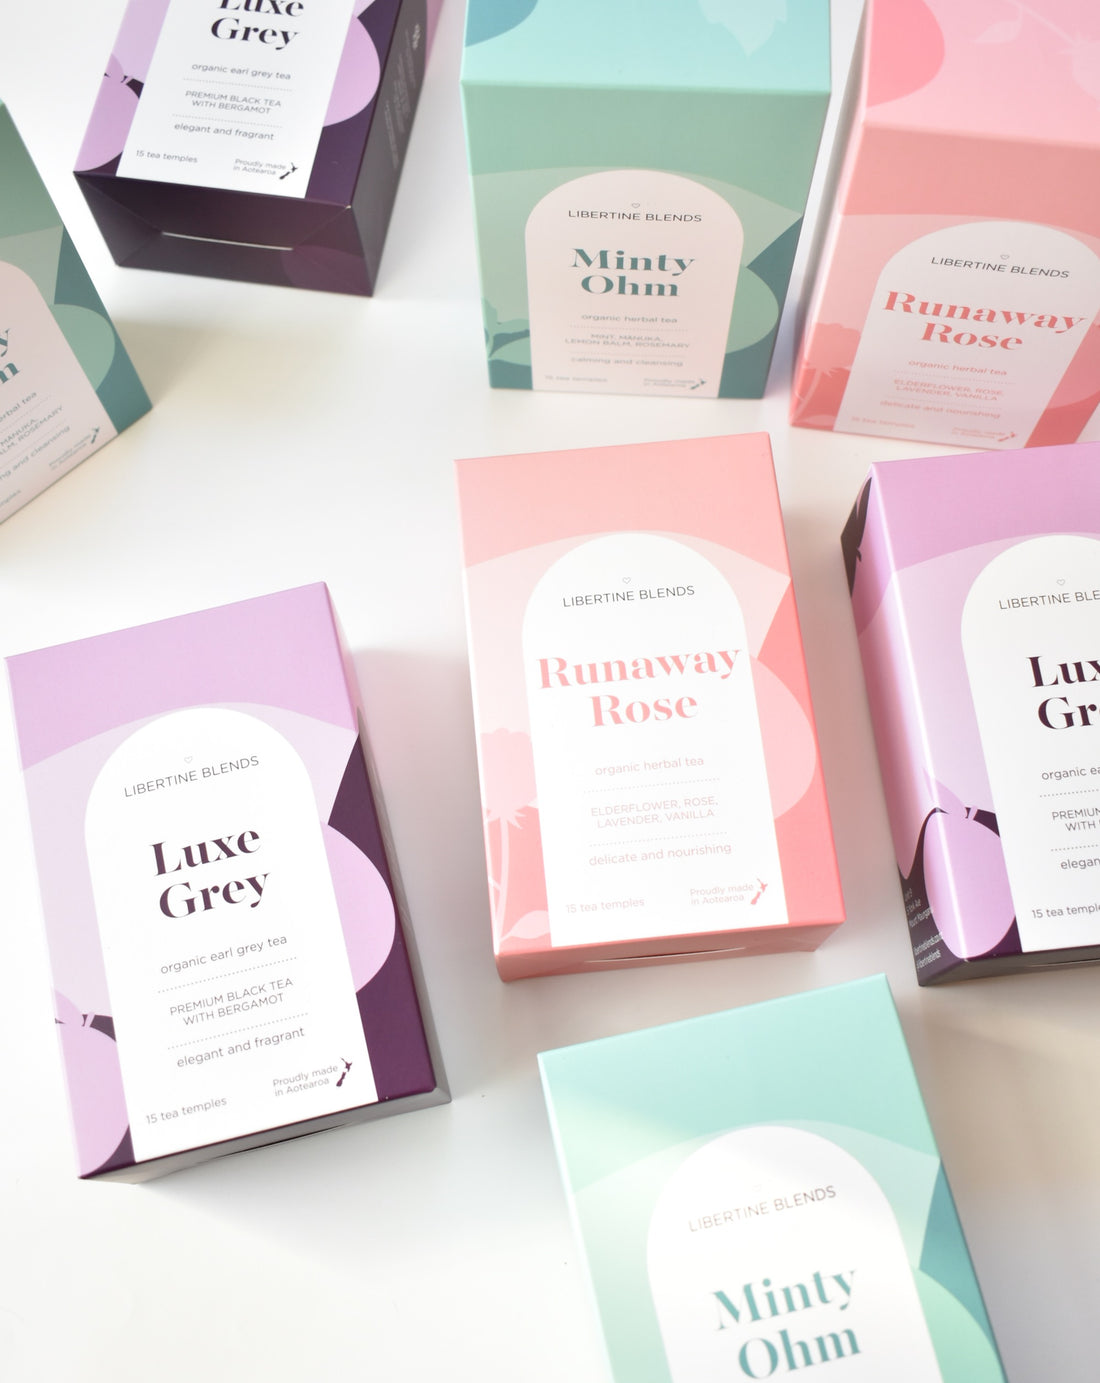 Boxes of herbal tea, mint, rose tea and earl grey in purple, pink and mint coloured packaging